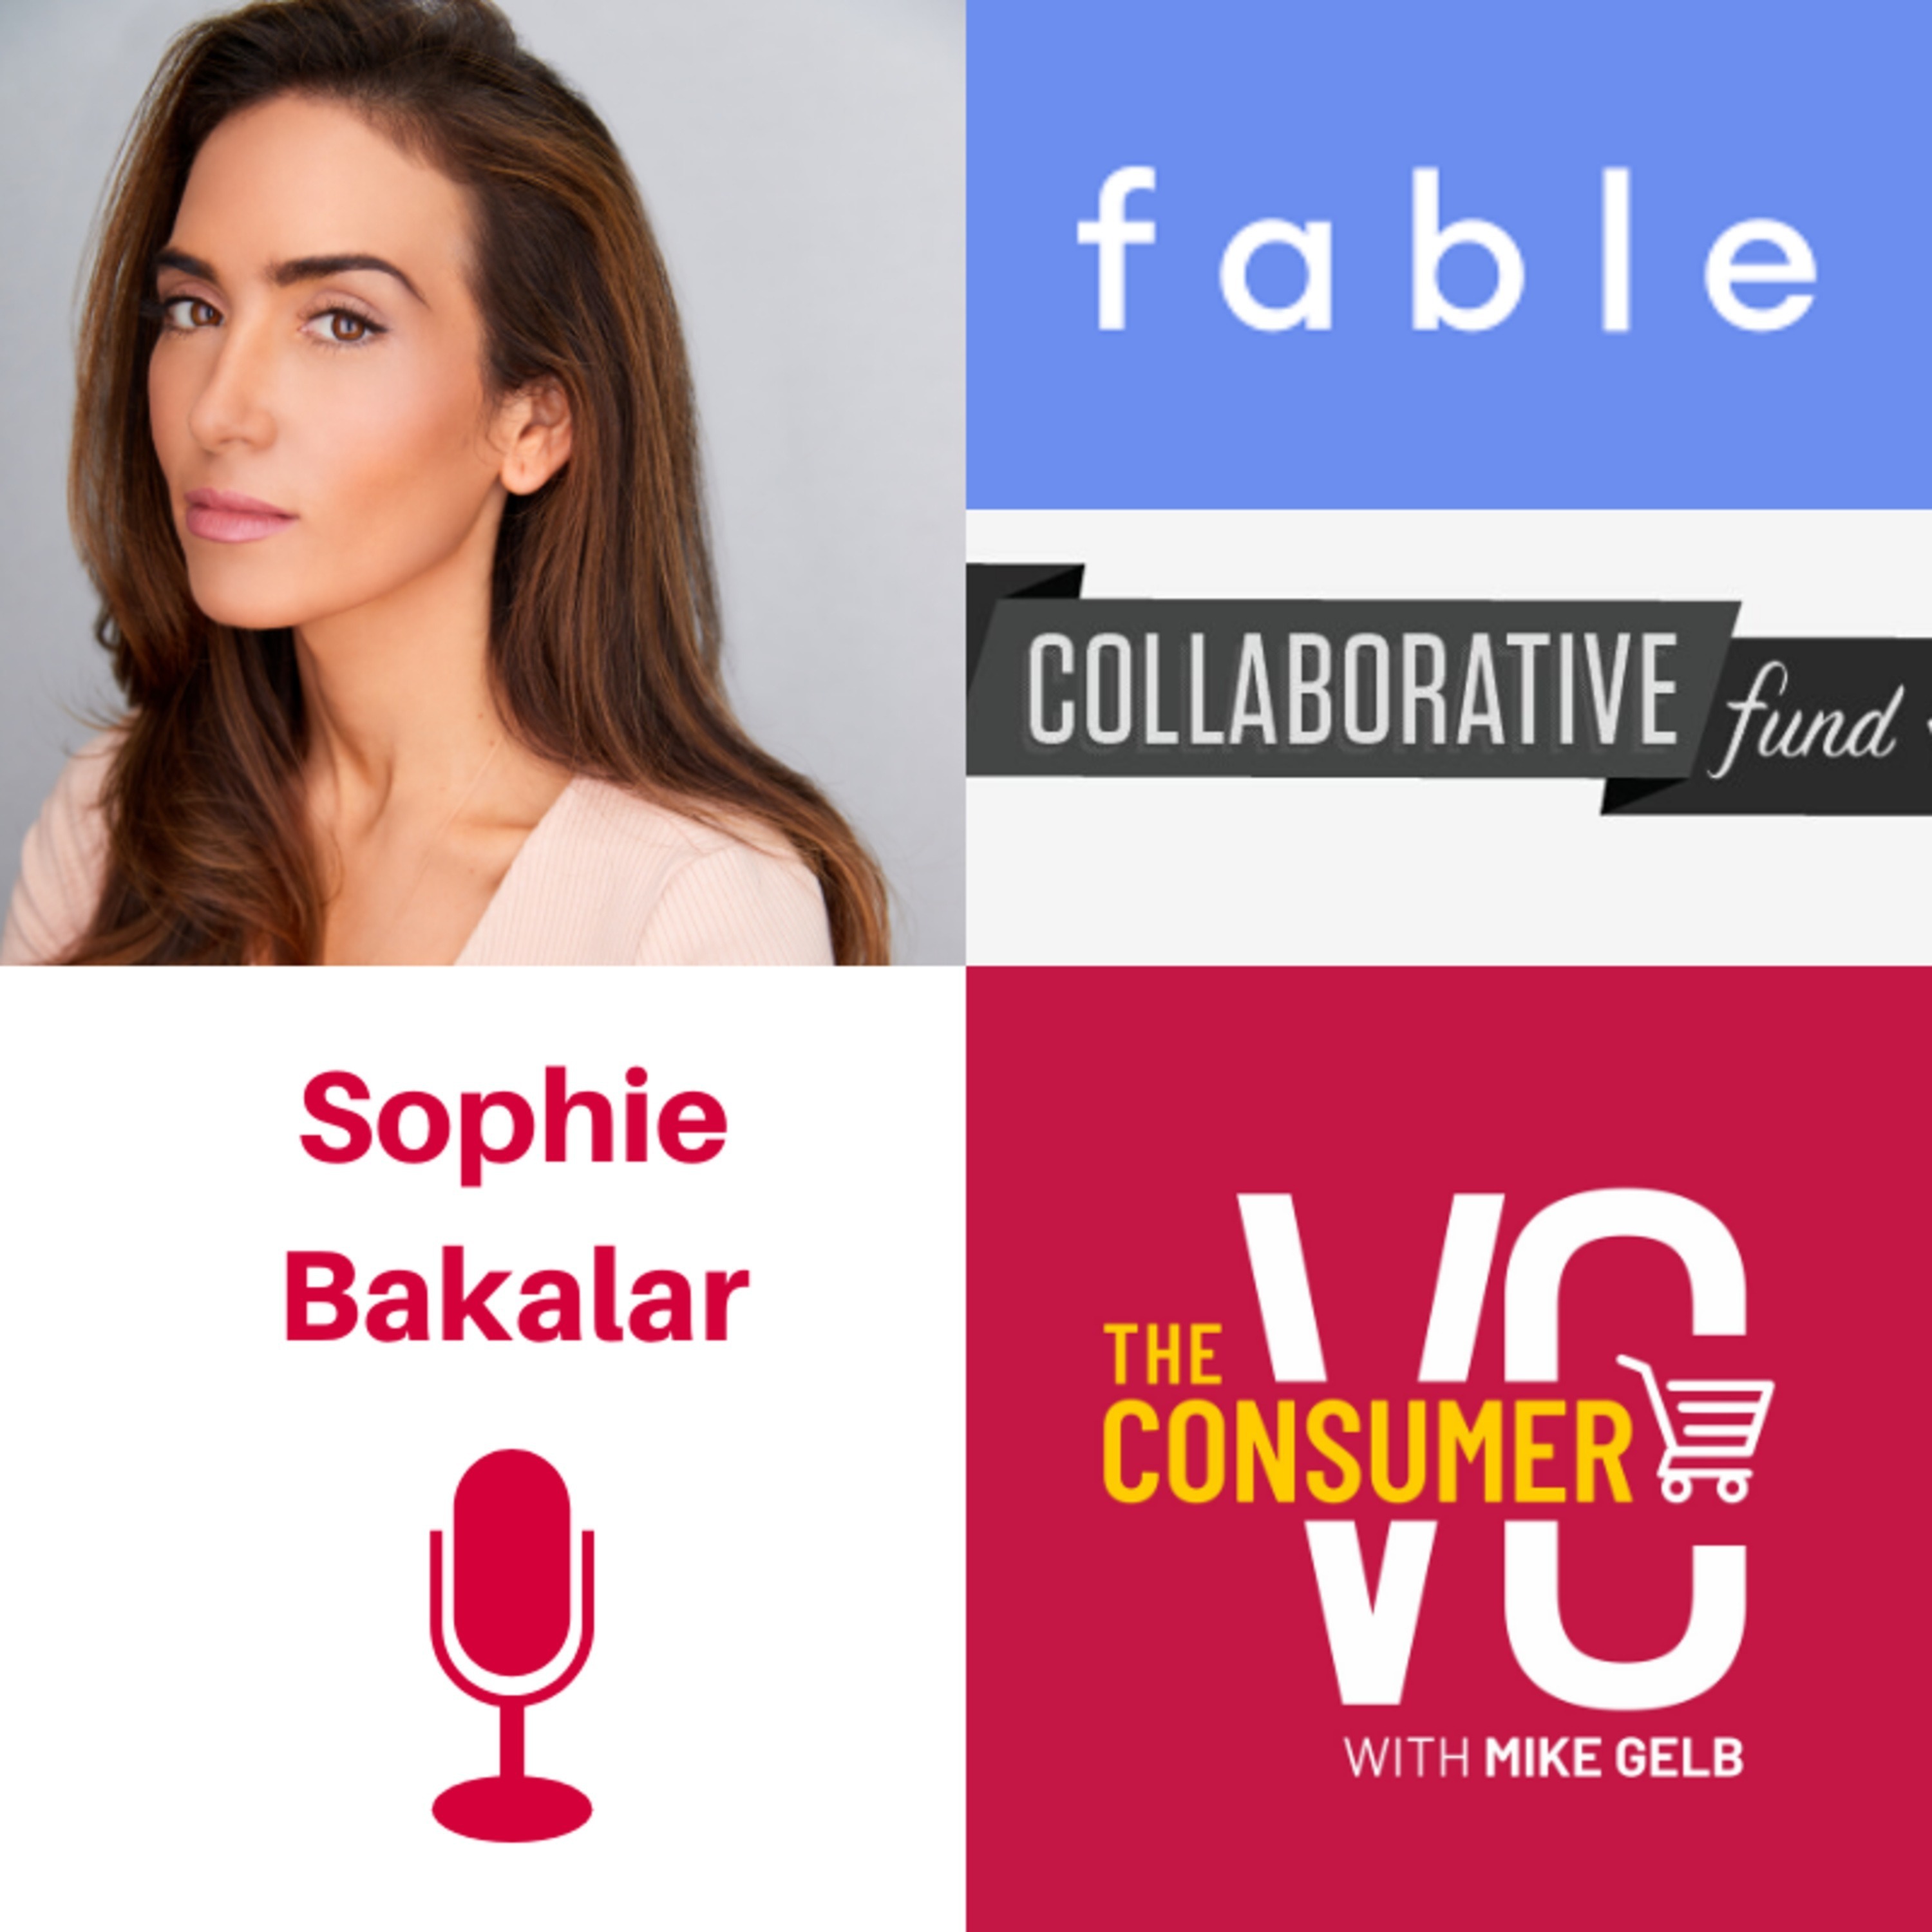 Sophie Bakalar (fable & Collaborative Fund) - What is Market Expertise?, Conscious Consumerism, and How She Sensed An Opportunity